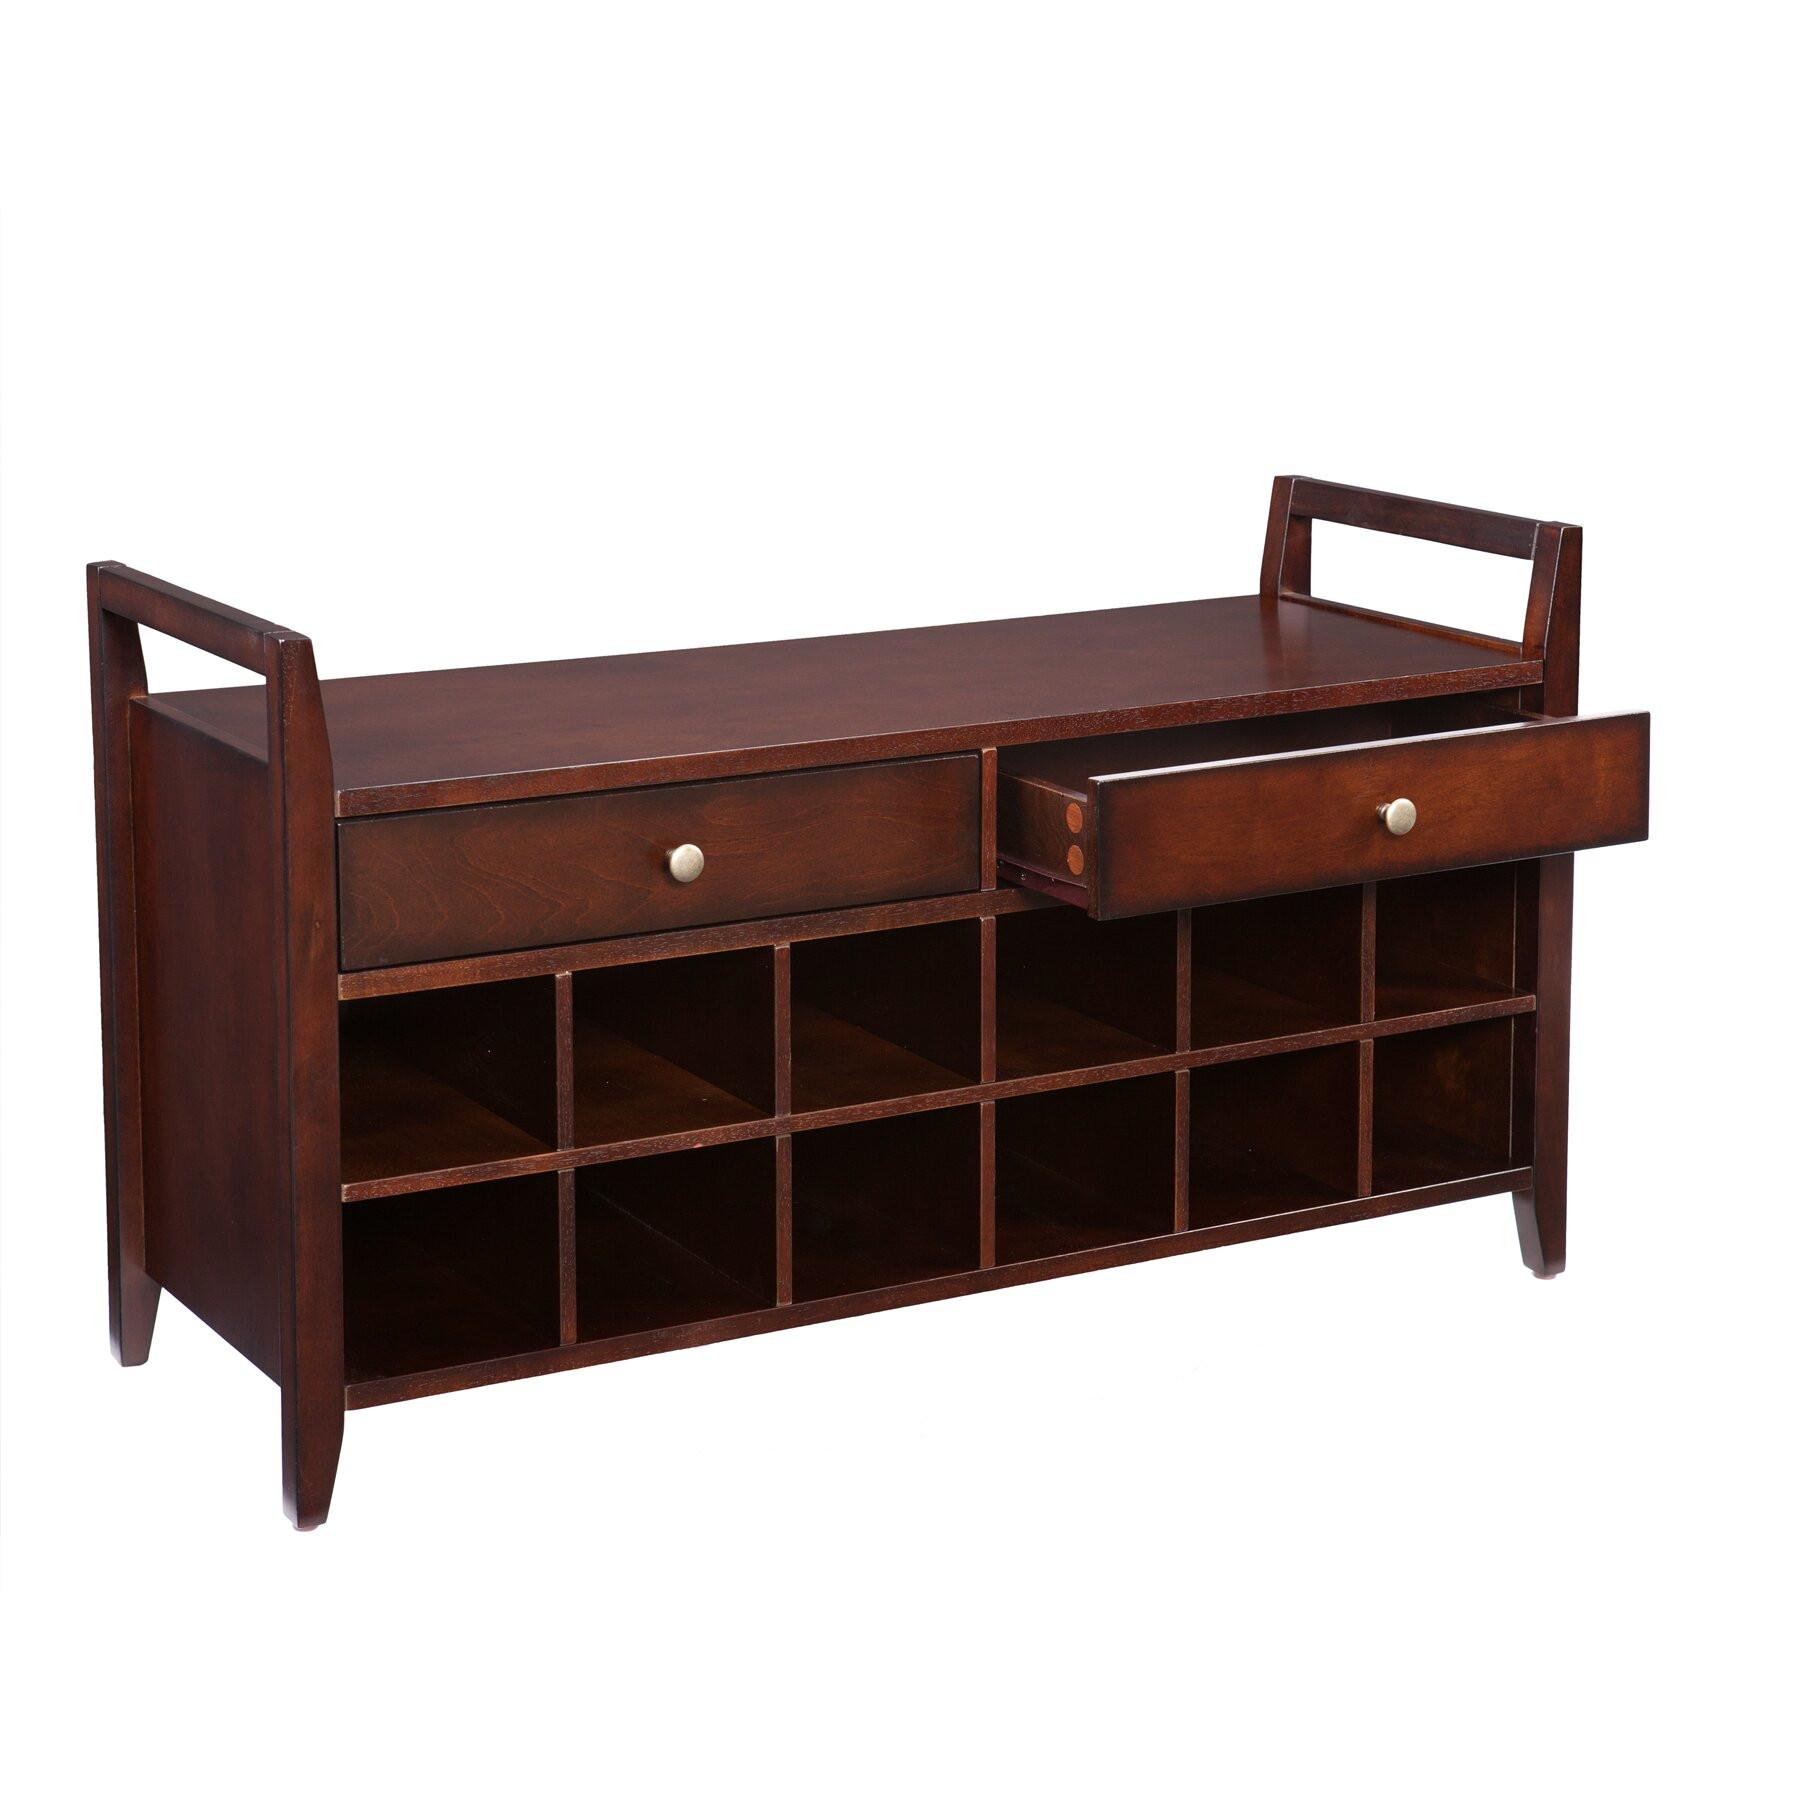 Entryway Bench With Shoe Storage
 Alcott Hill Whitmore Shoe Storage Entryway Bench & Reviews